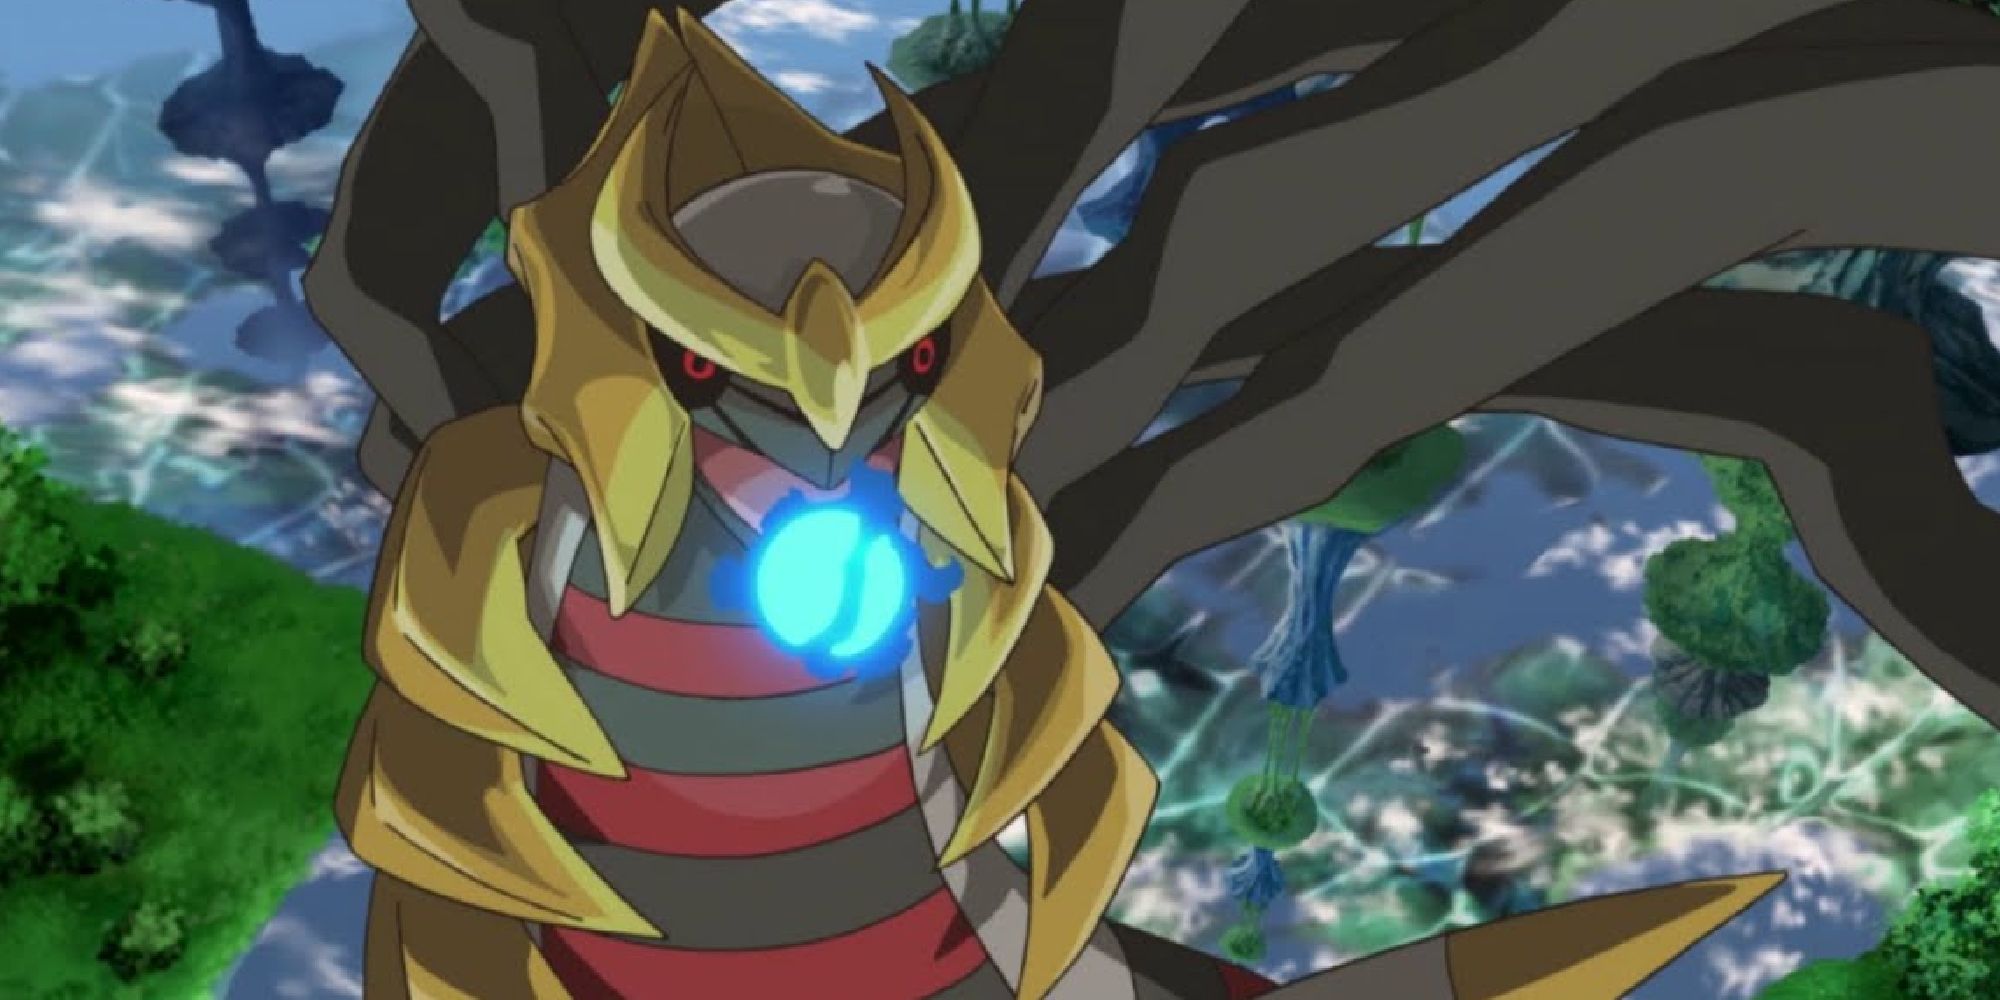 Giratina charging up an energy blast in the sky